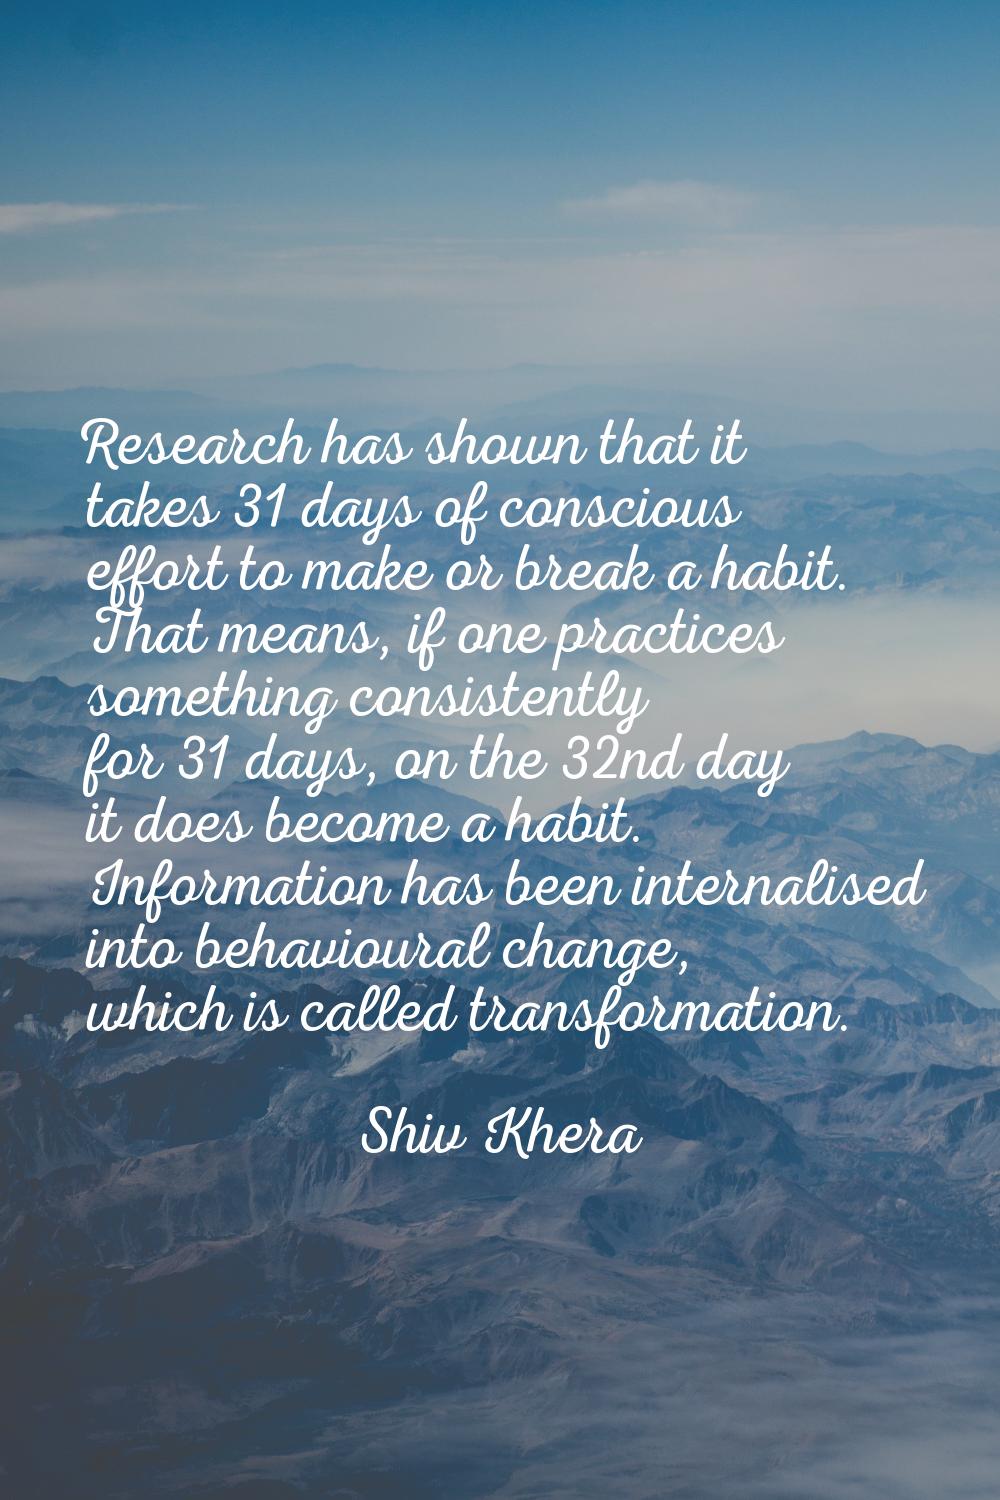 Research has shown that it takes 31 days of conscious effort to make or break a habit. That means, 